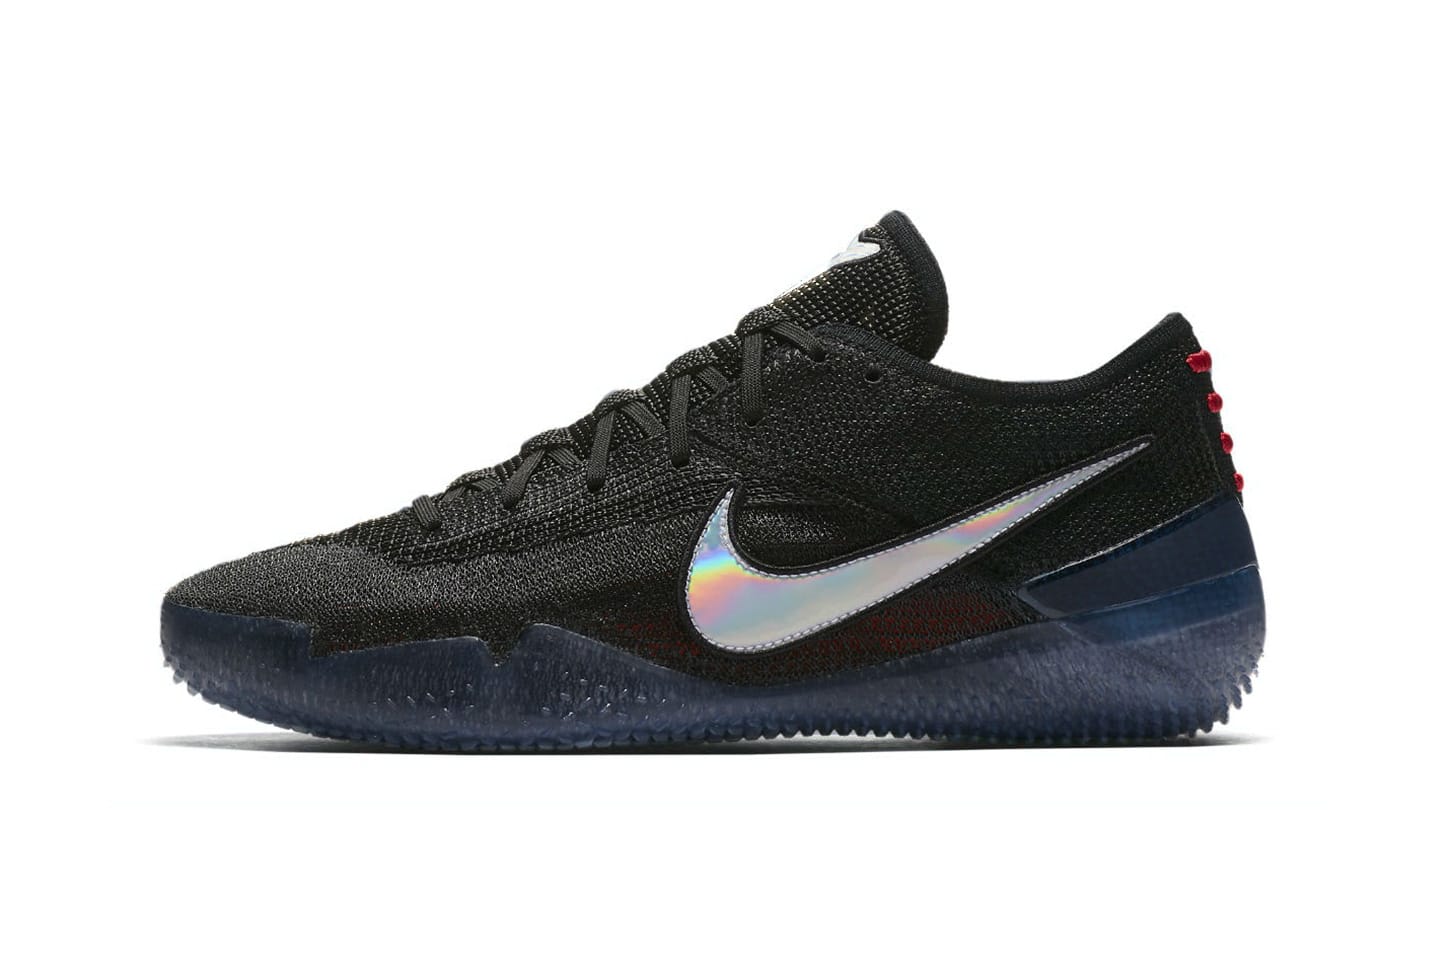 Nike Kobe NXT 360 Official Images | Hypebeast